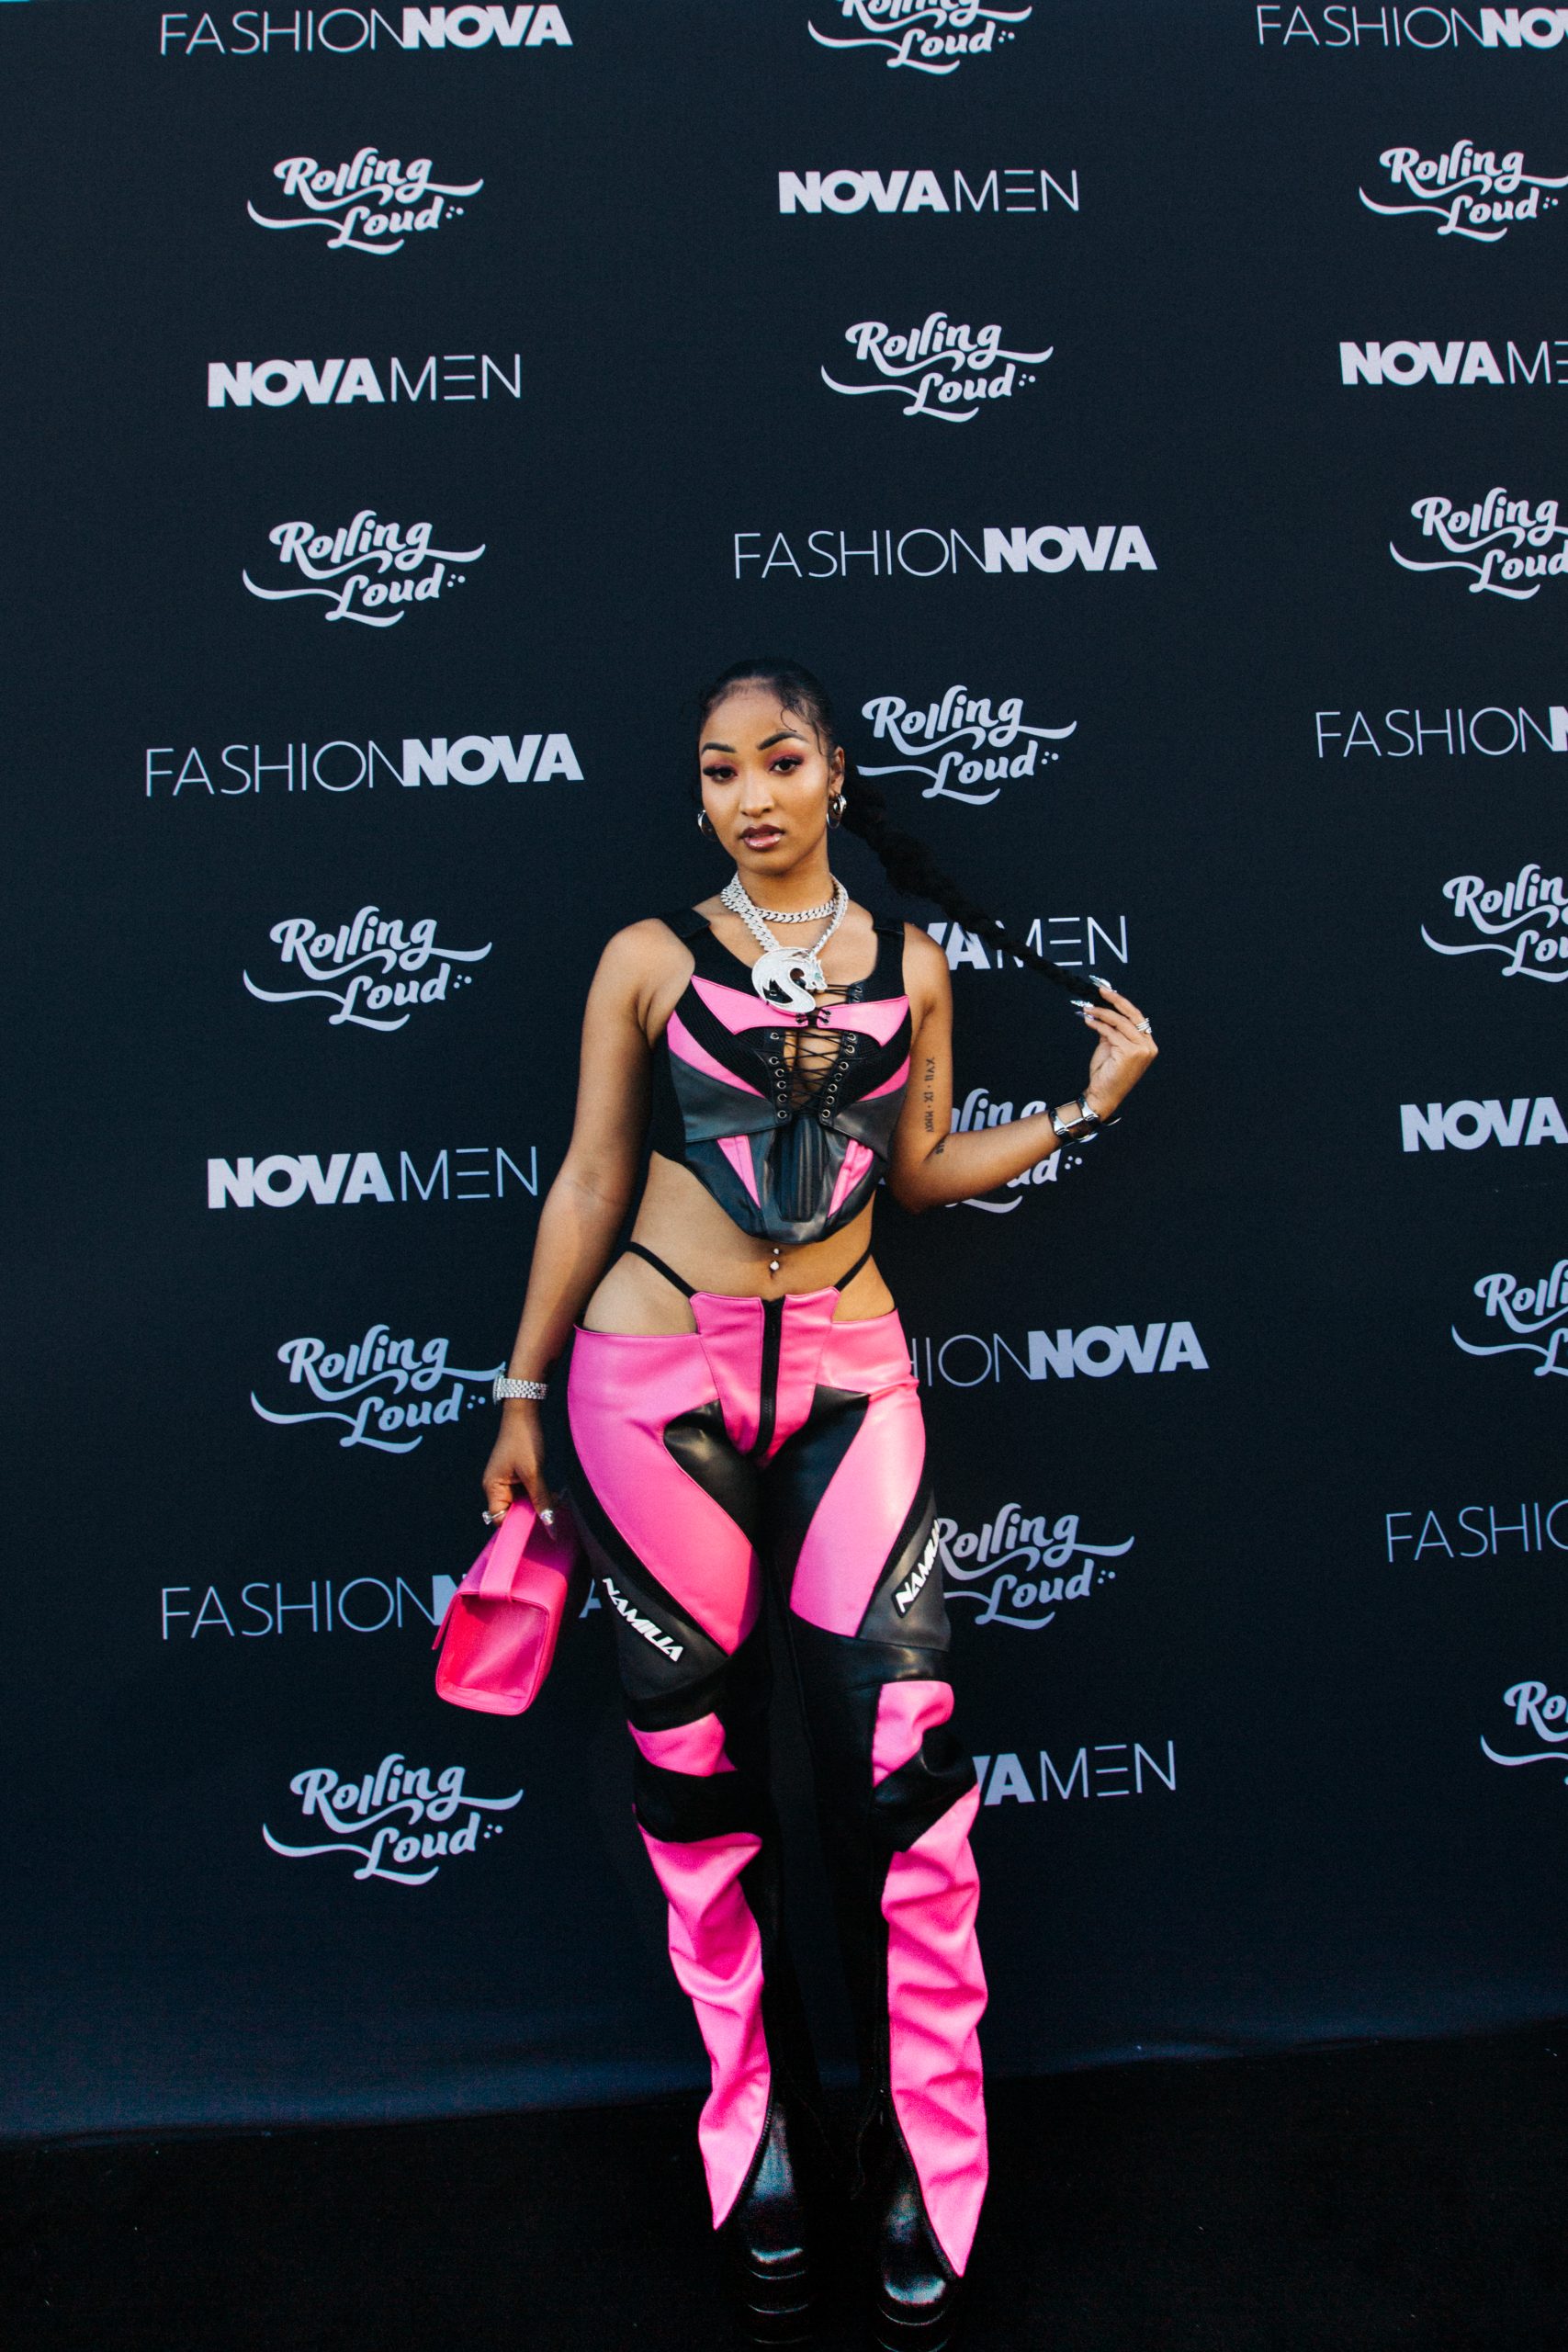 Shenseea at the Fashion Nova Stage at Rolling Loud New York 2022 at Citi Field in Queens, New York on Sunday, September 25. PHOTO CREDIT: Meraki House for Fashion Nova